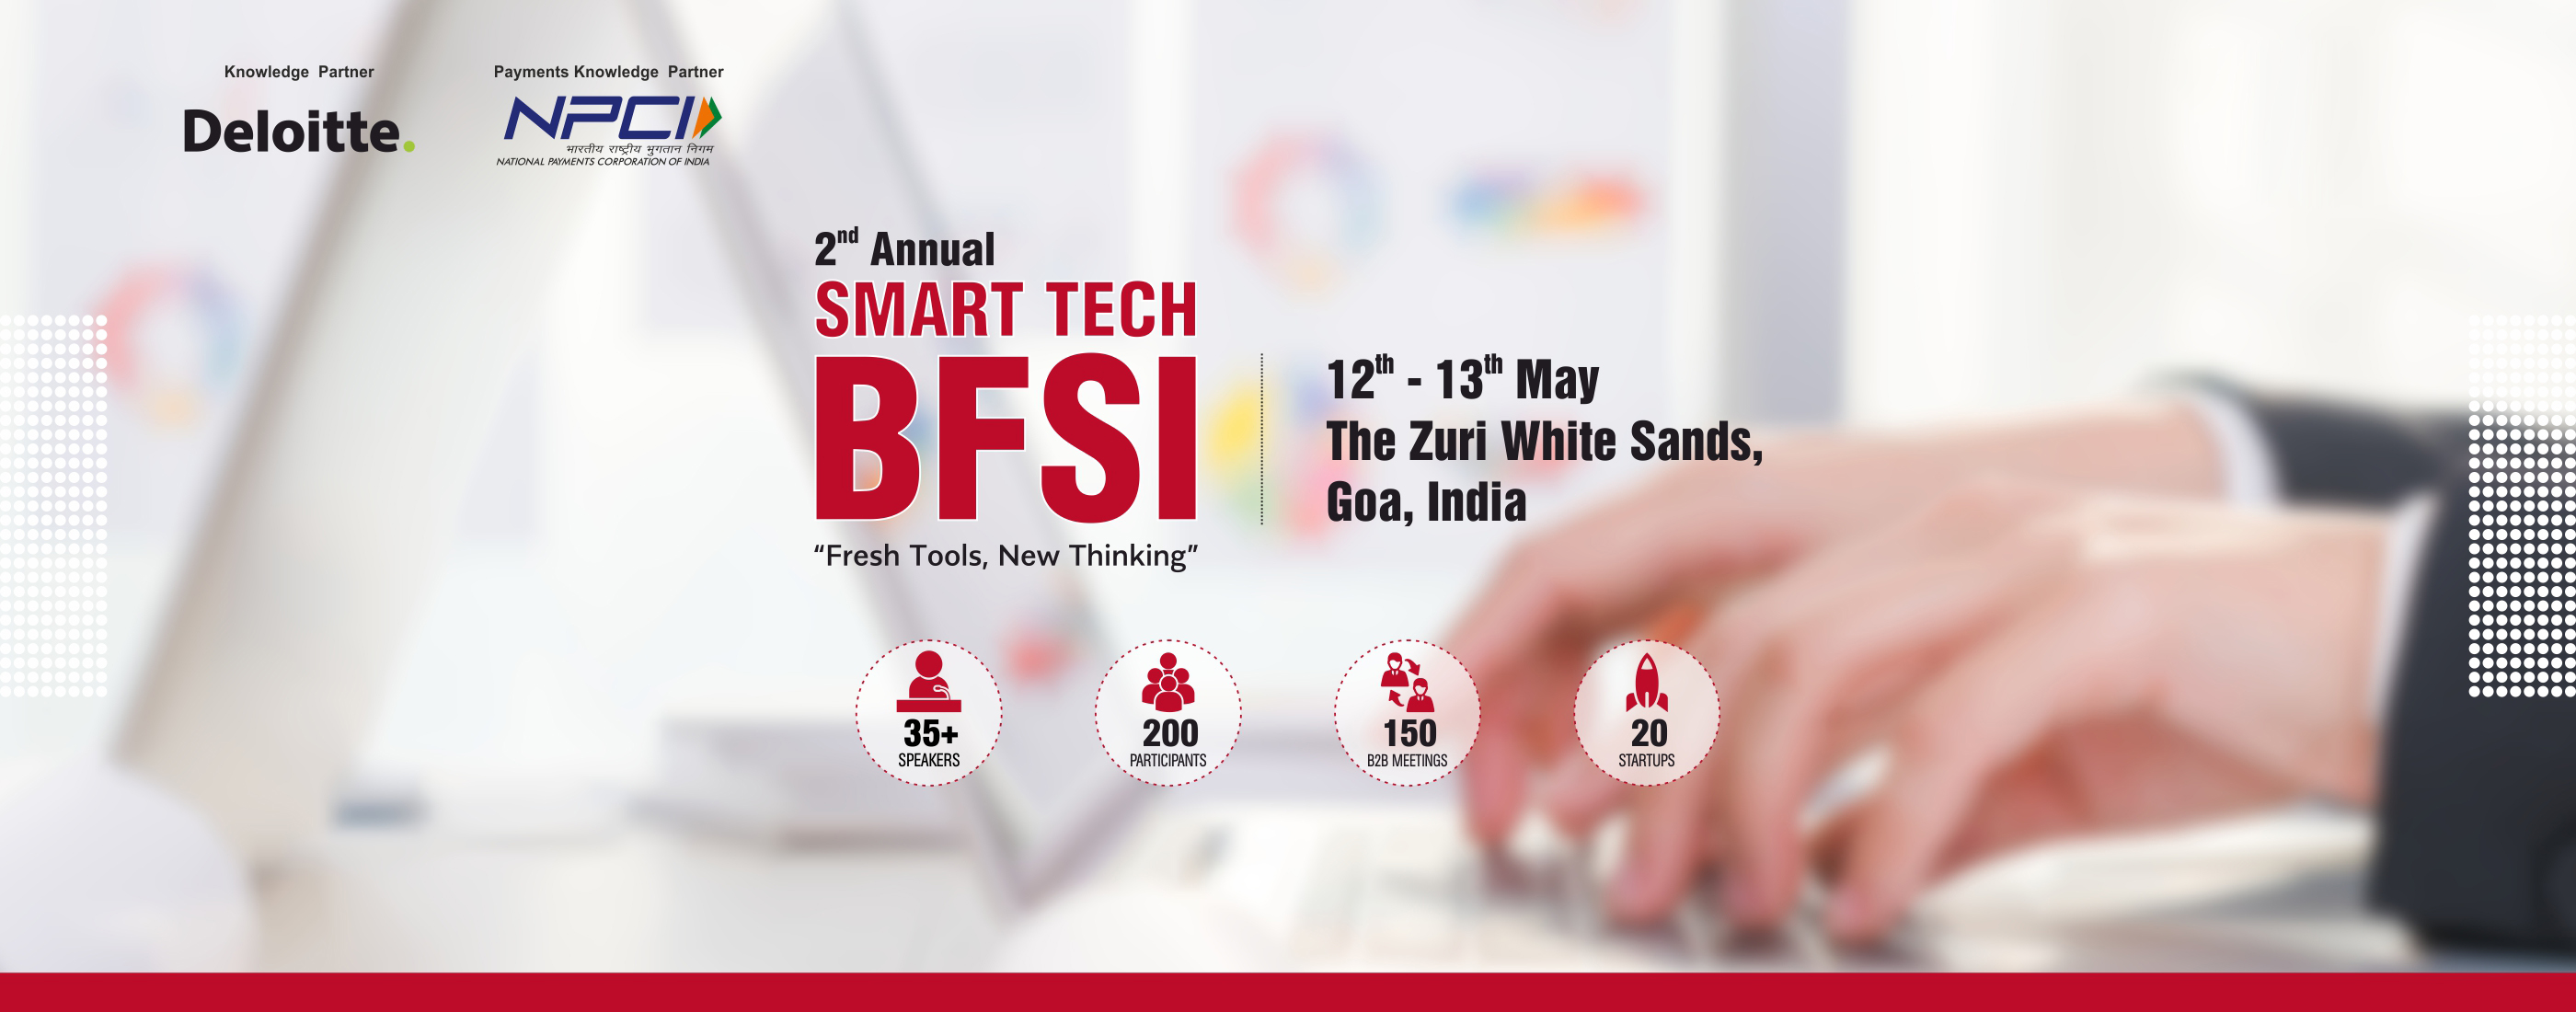 The 2nd Annual SMART TECH BFSI conference cum exhibition will take place on the 12th & 13th of May, 2017 in Goa, which will engage 200+ C' level delegates. This 2-day C-Parity event will address the key issues of banking transformation and innovation by bringing on board expert speakers from the industry to address and provide updated information and solutions to the challenges faced by the industry.